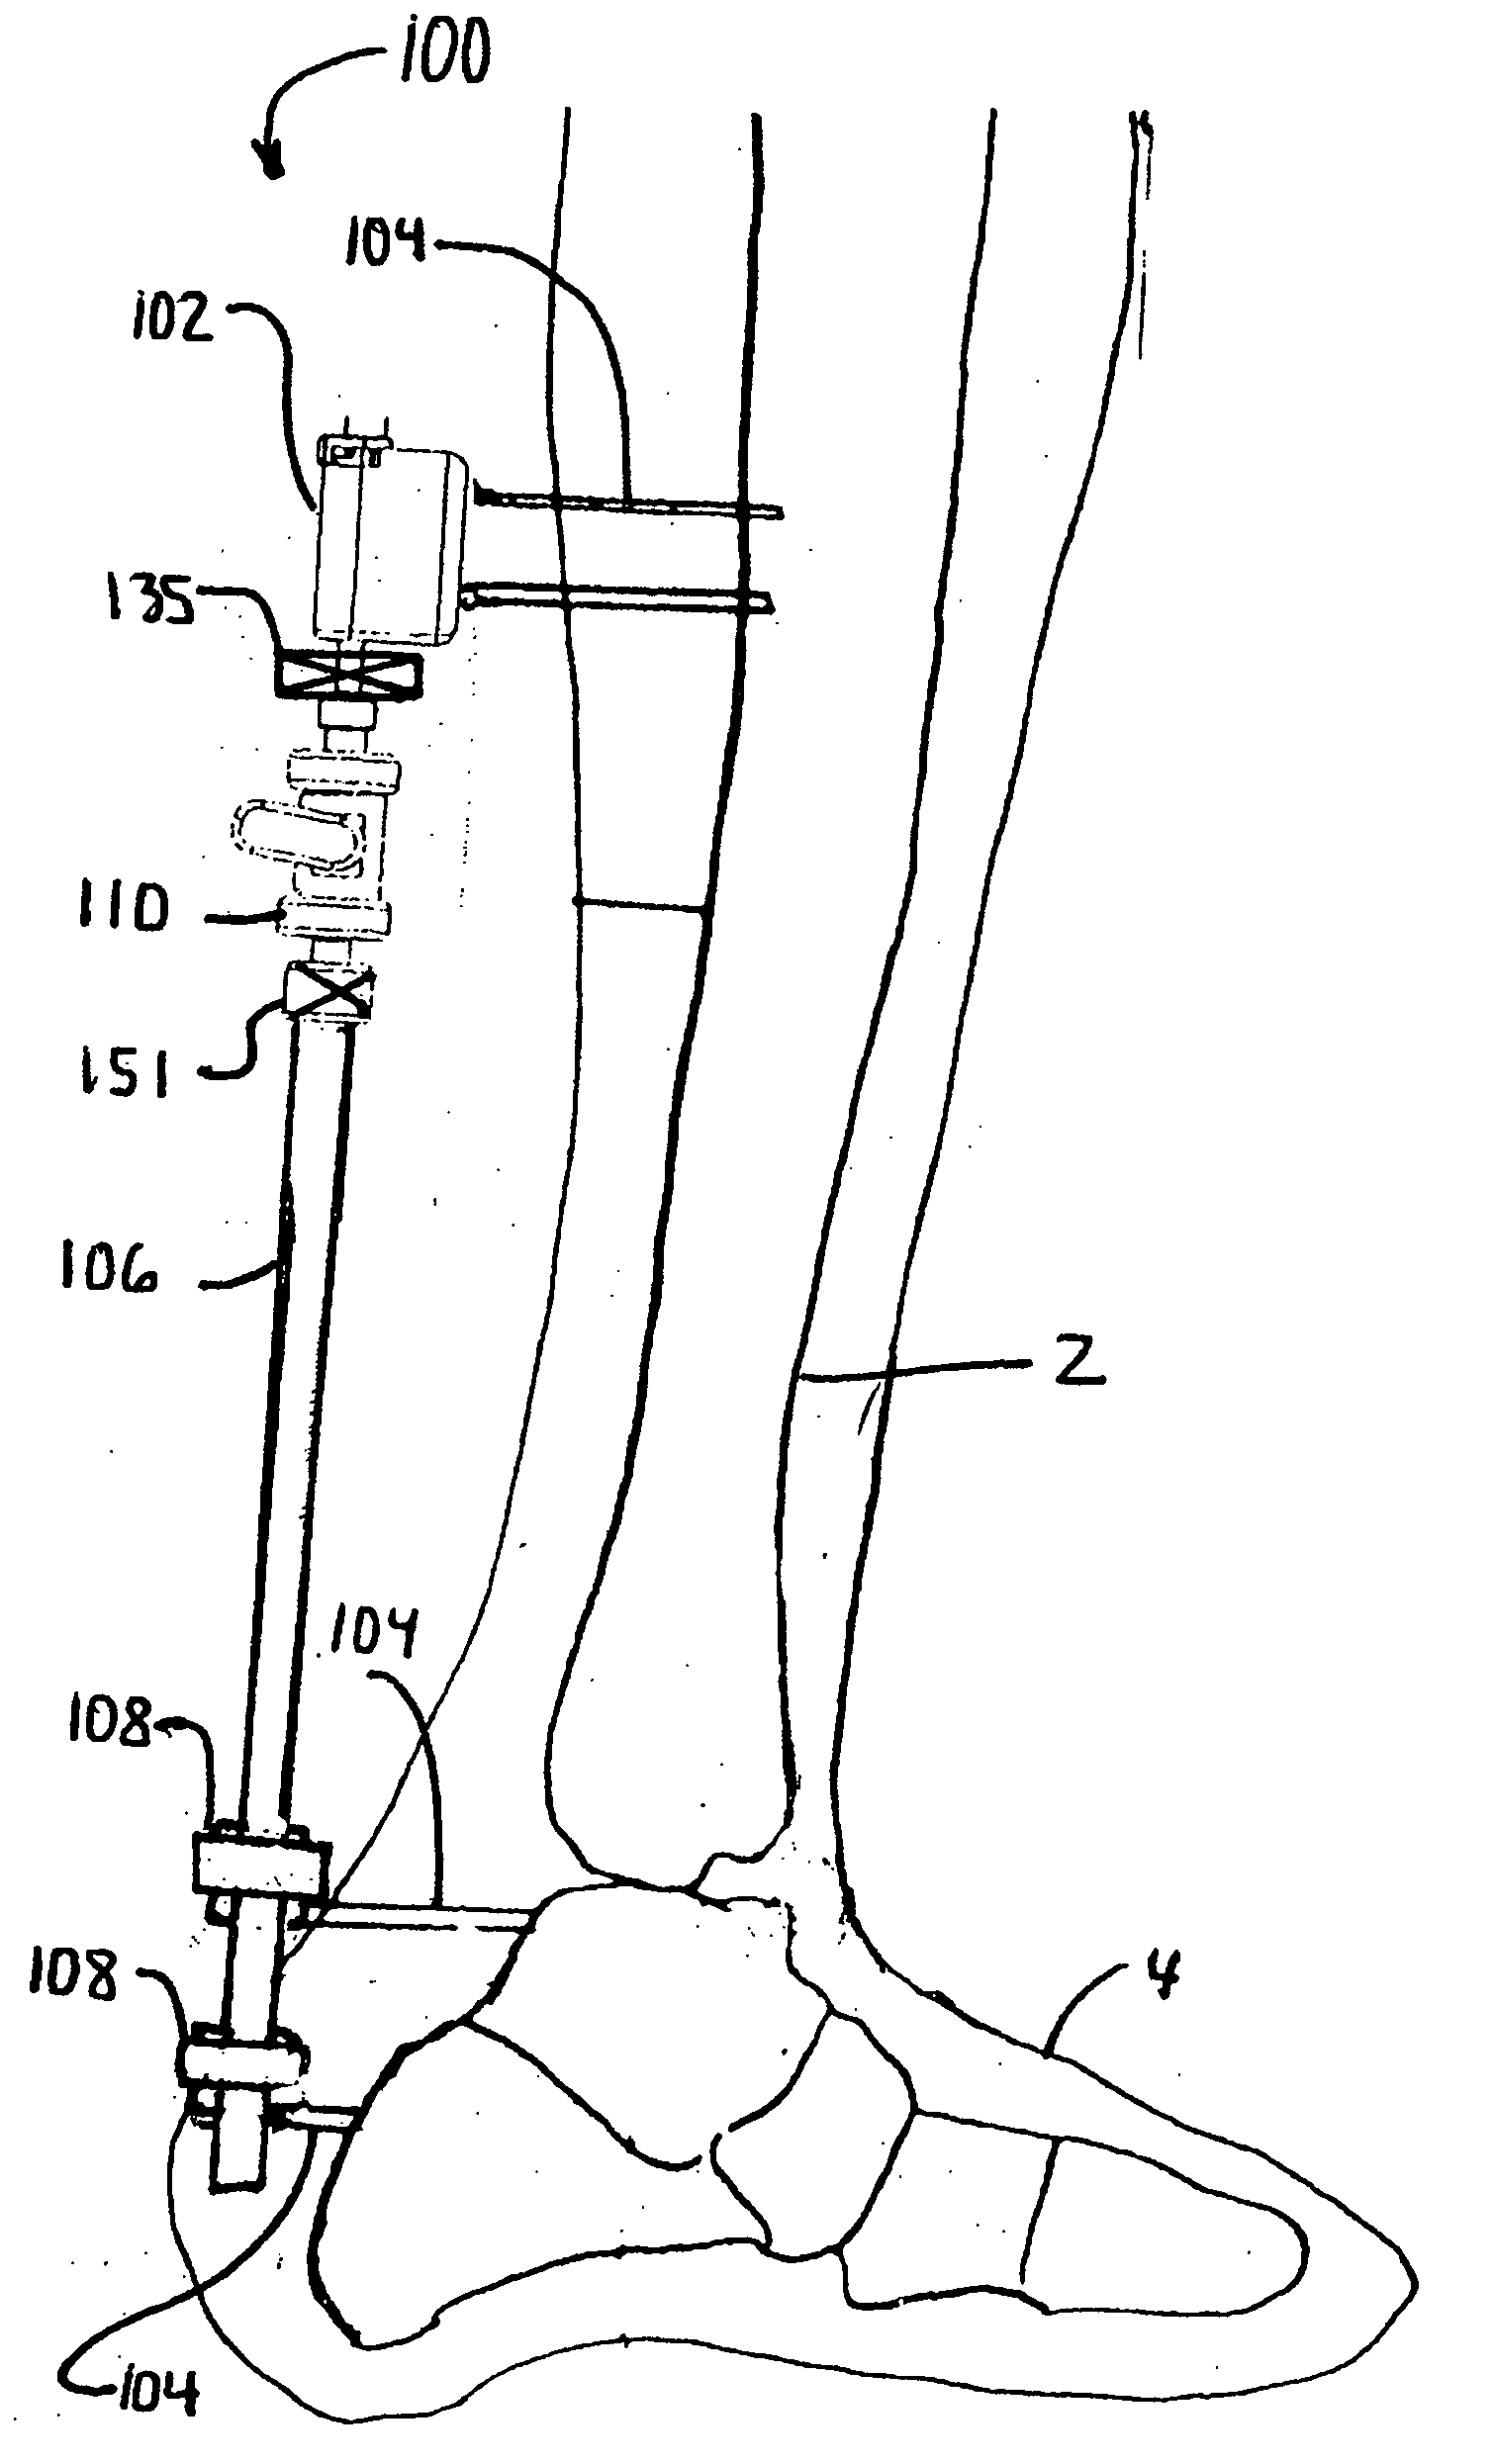 Orthopaedic joint, device and associated method